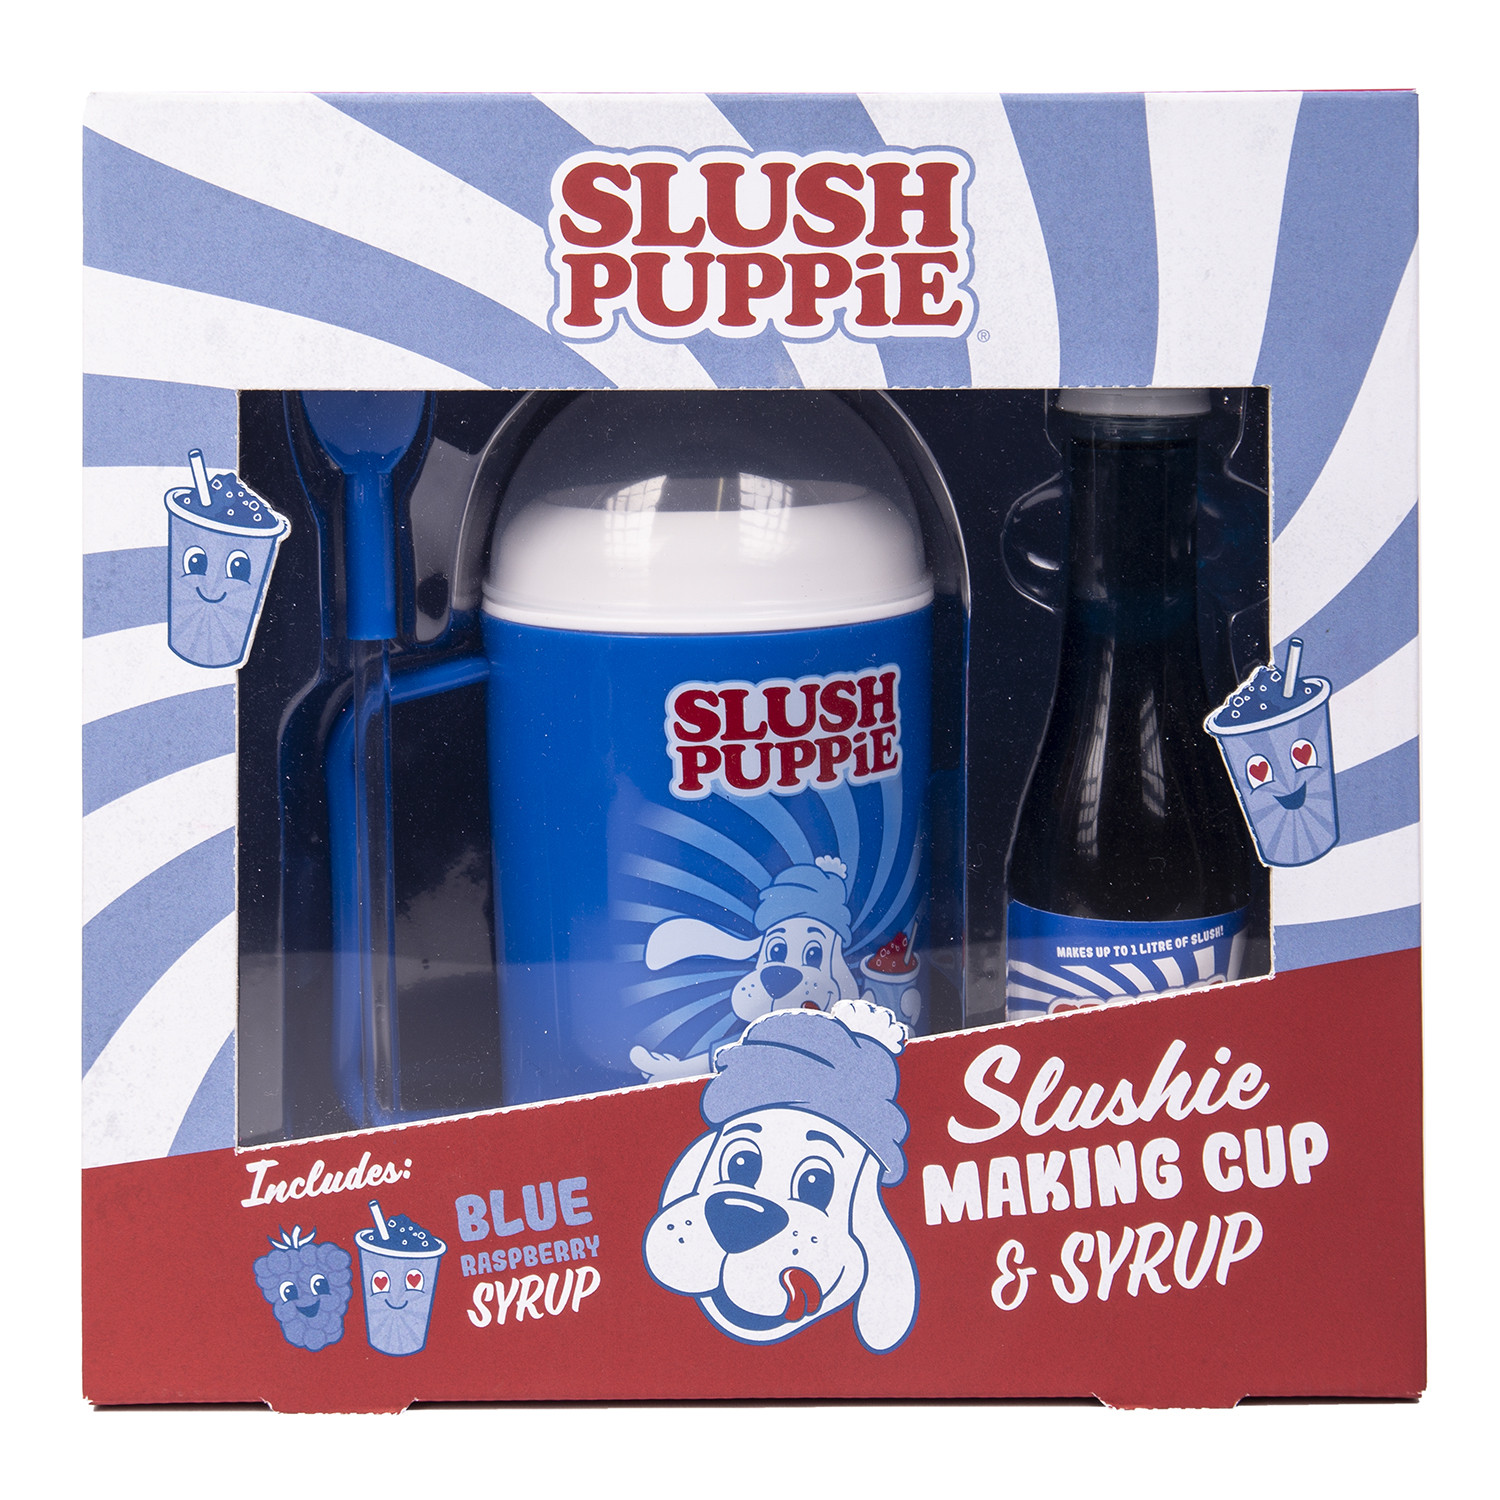 G&G Blue Raspberry Flavoured Slushie Making Cup and Syrup Image 1